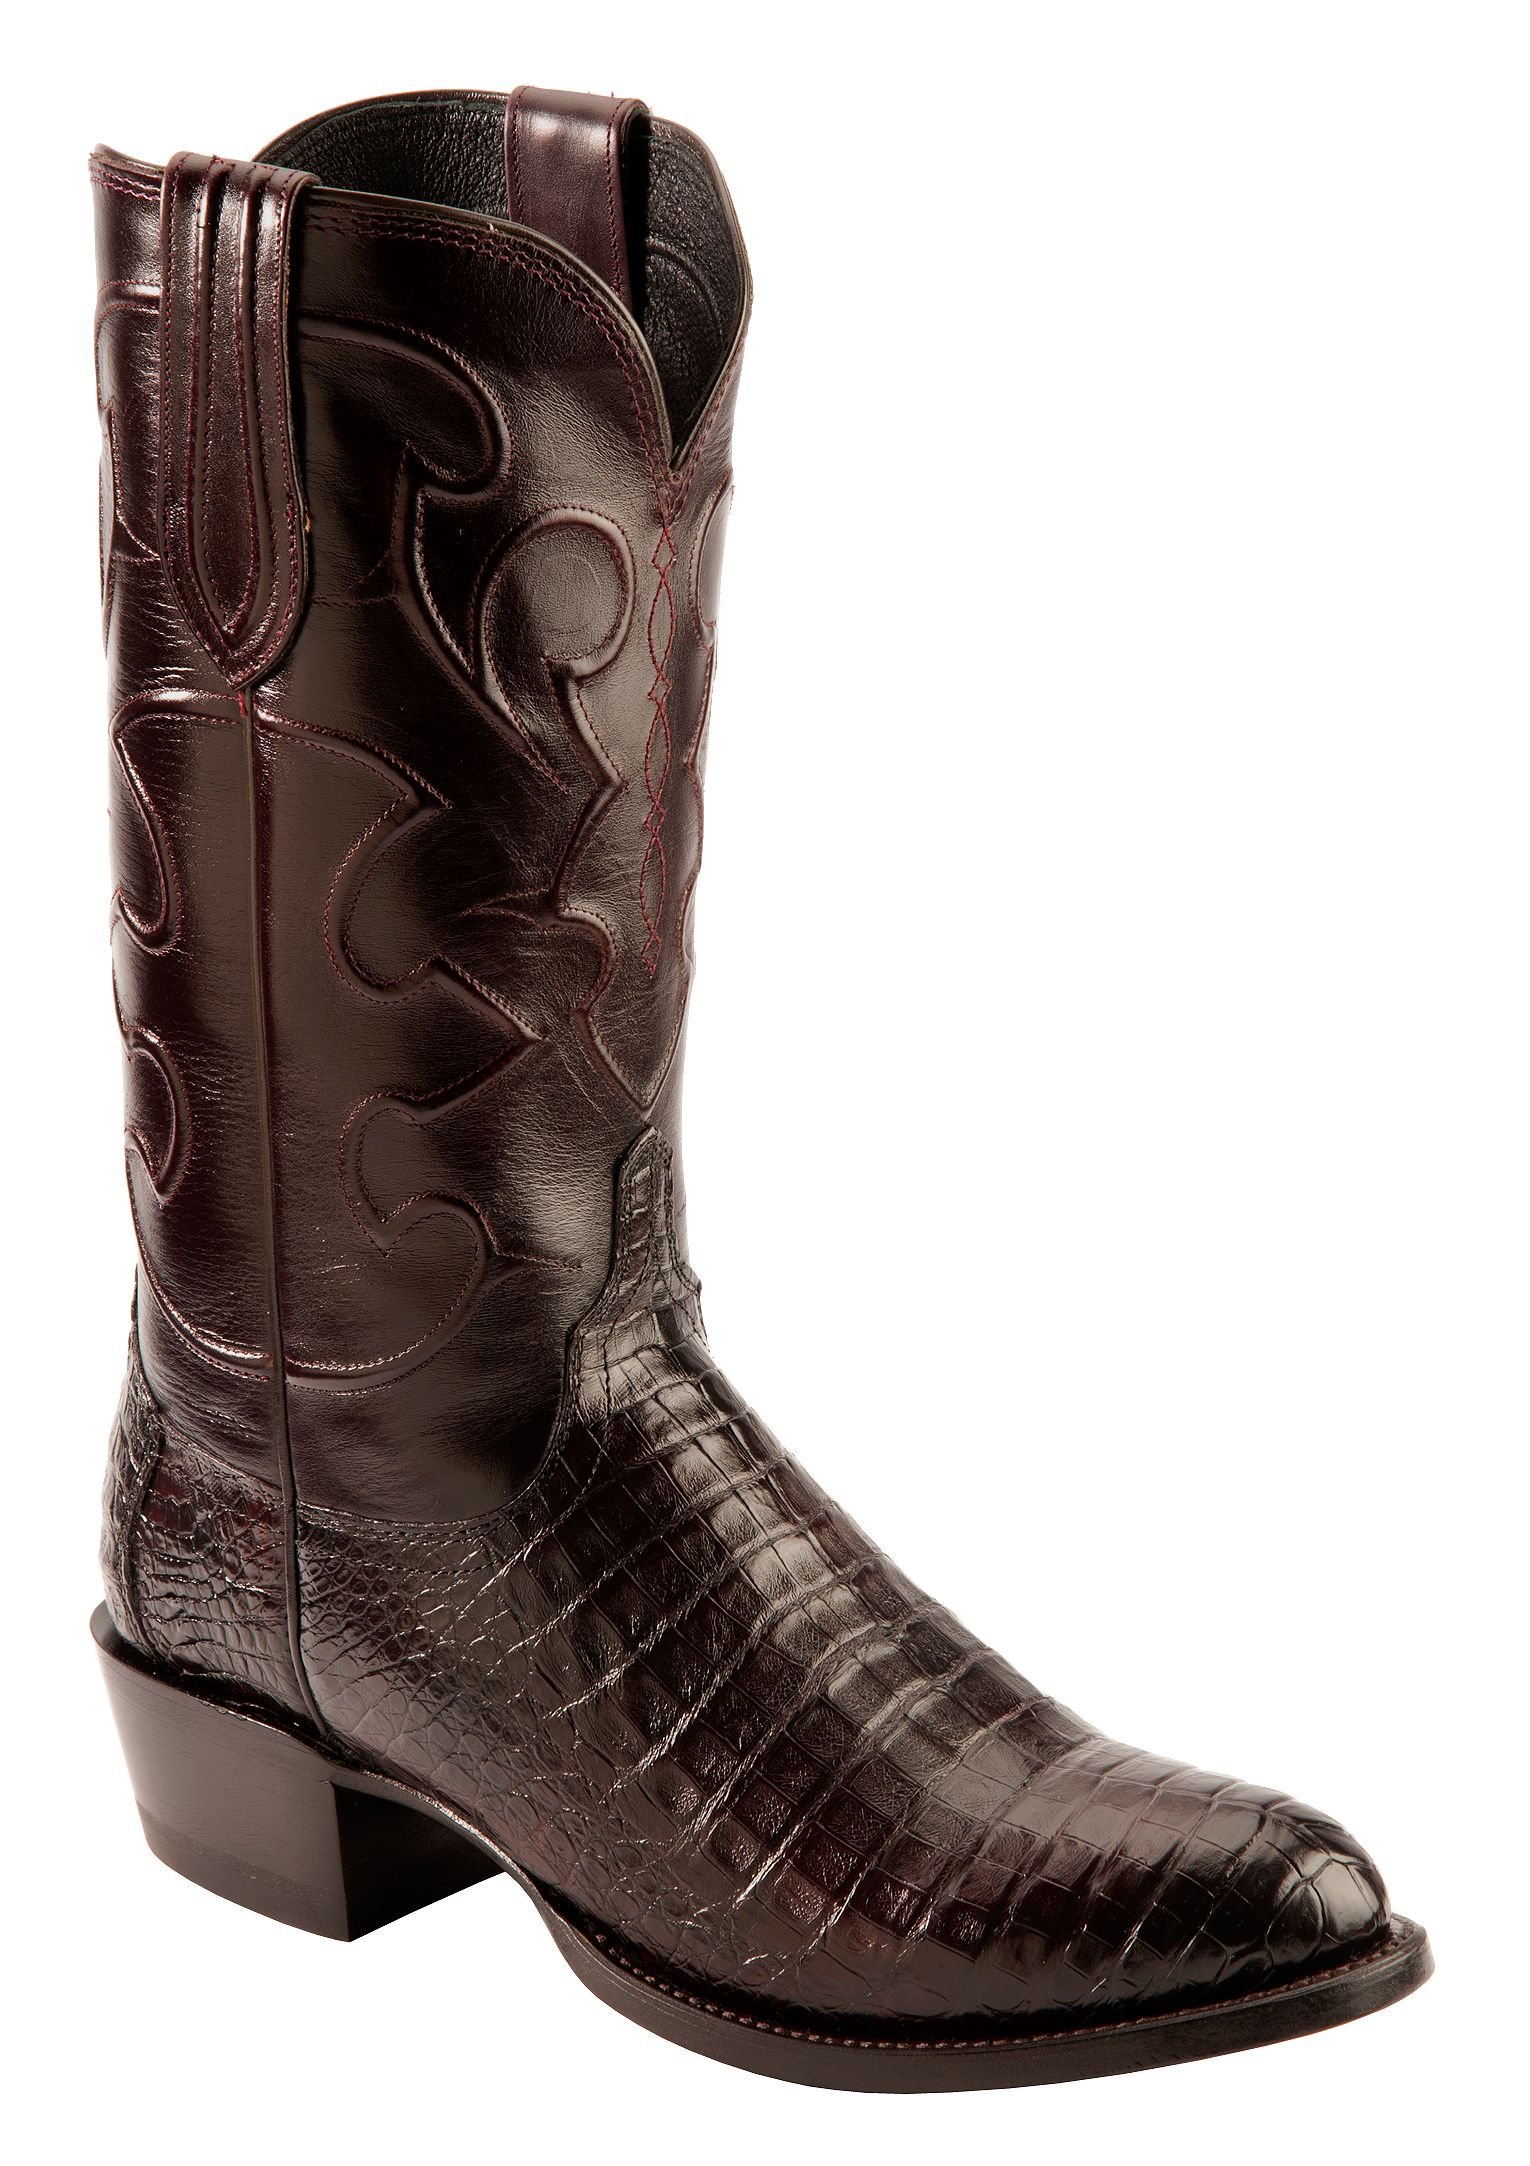 black lucchese women's boots